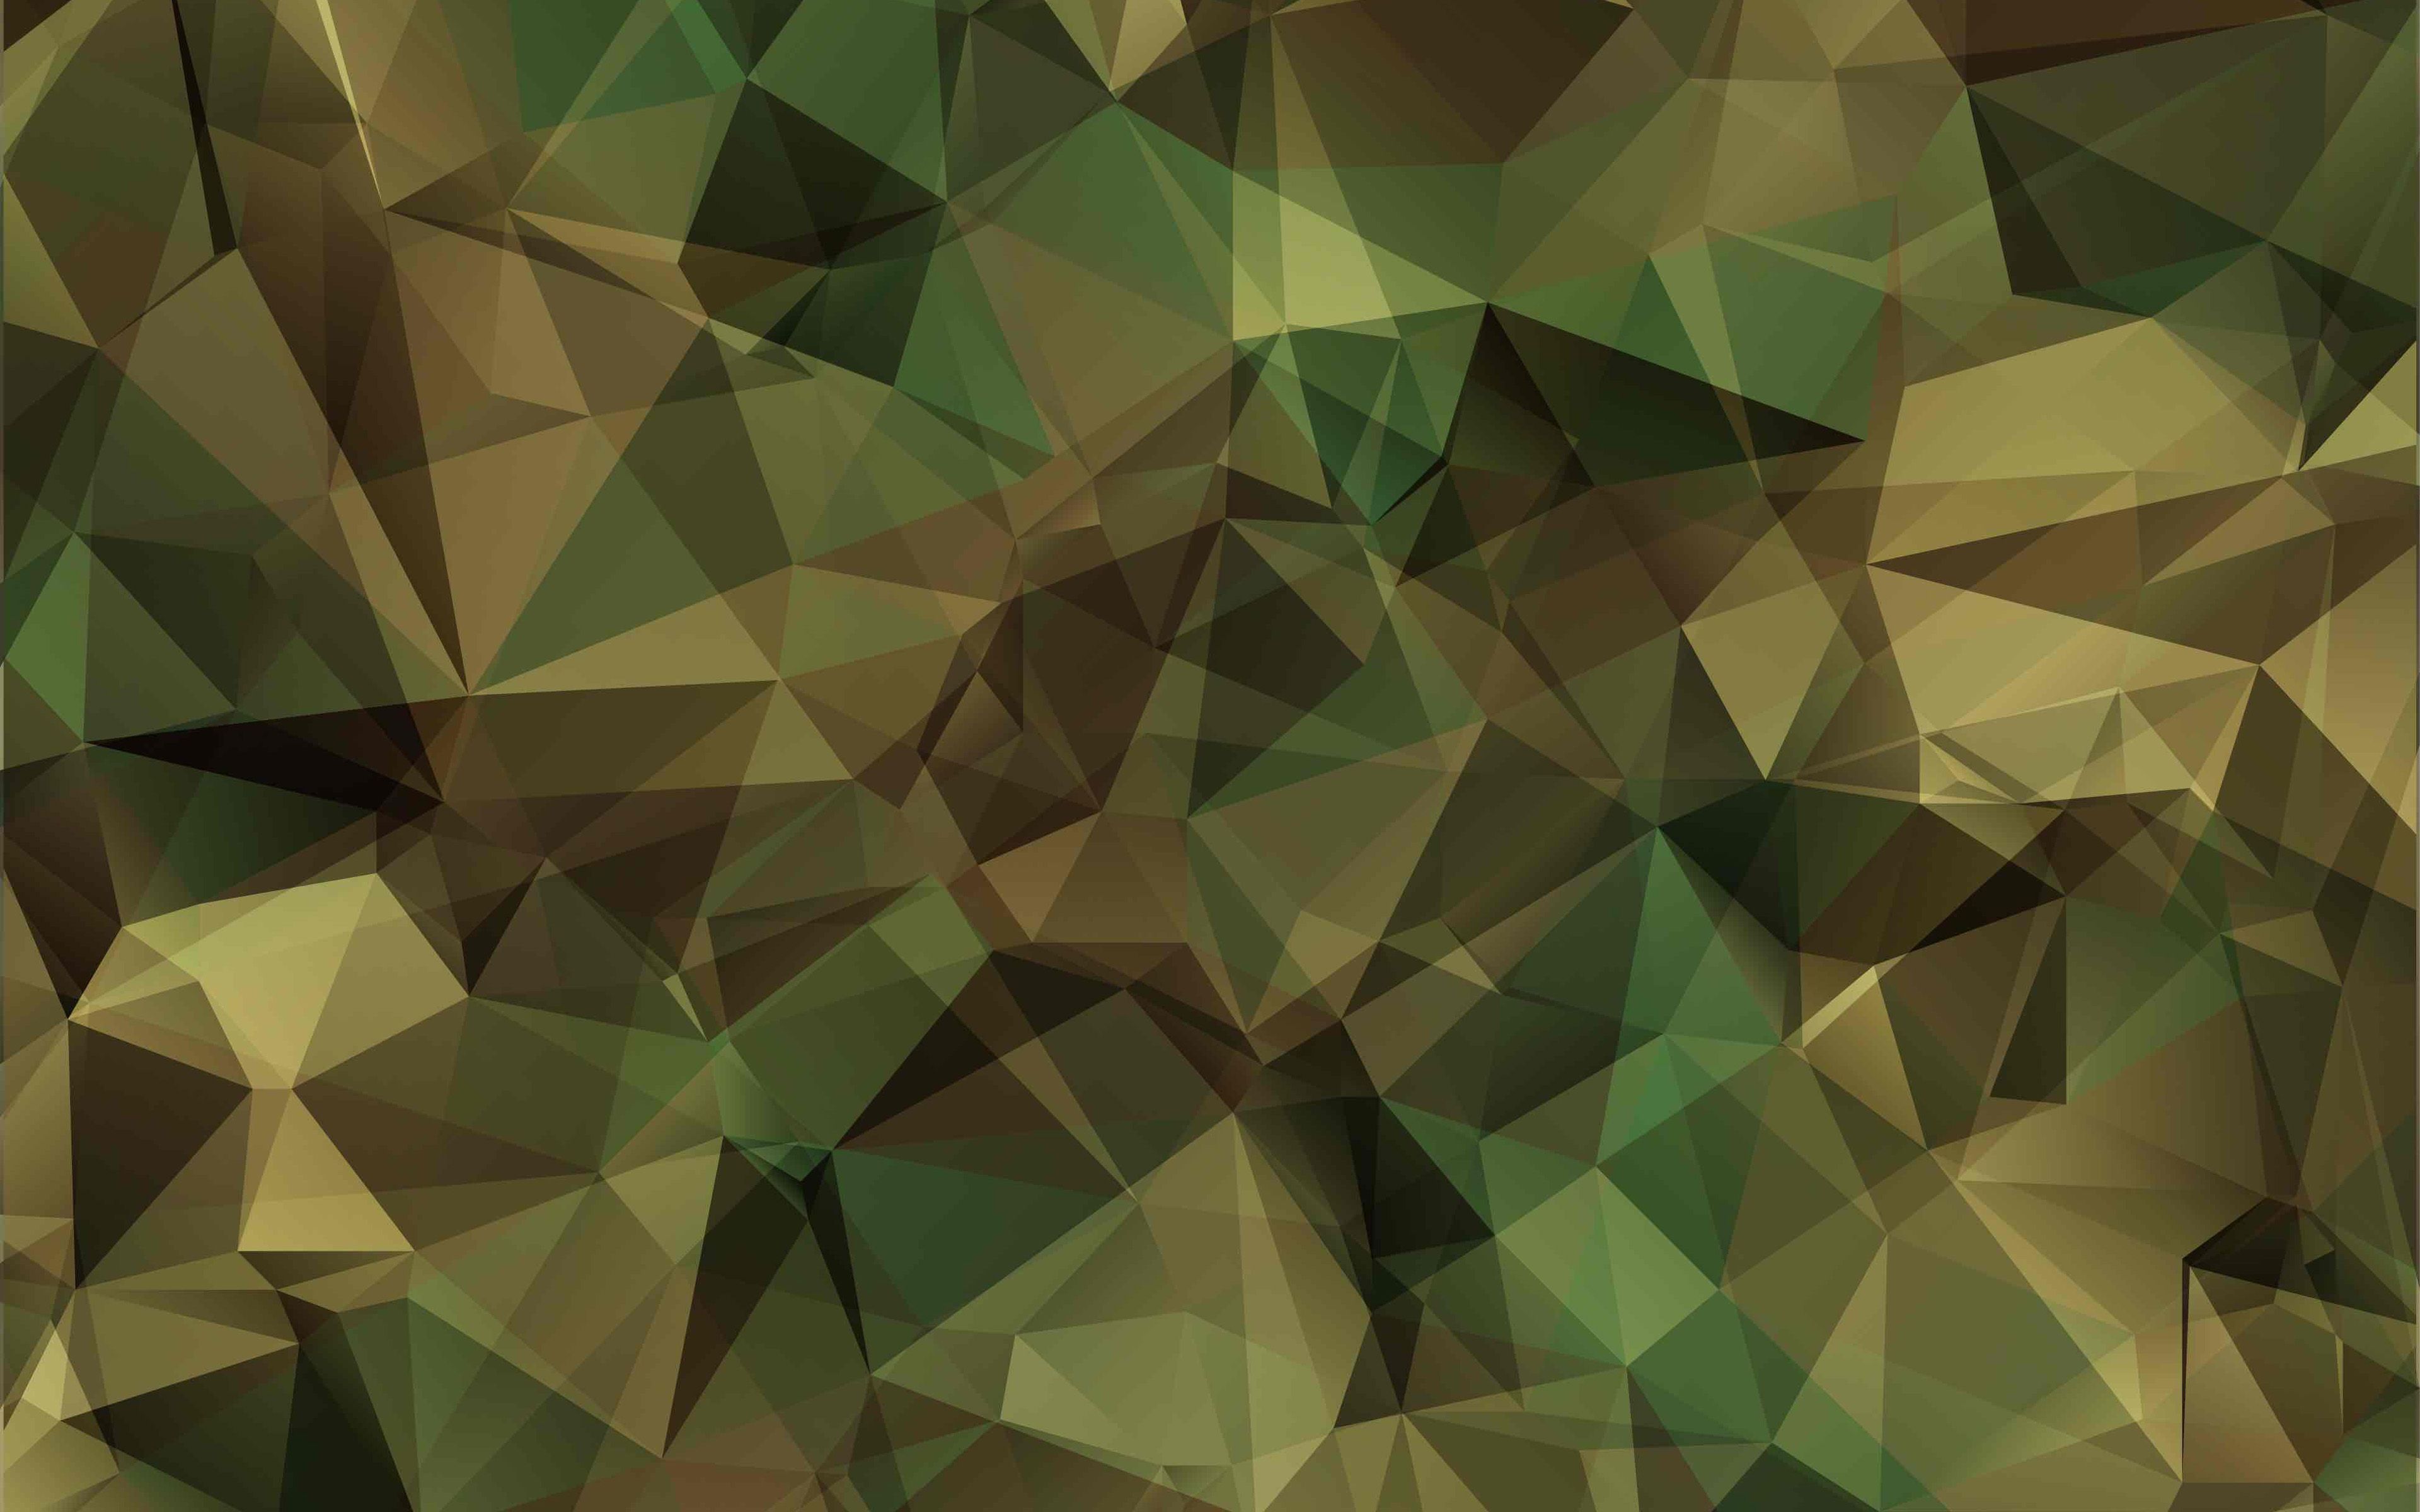 Download wallpaper low poly camouflage, 4k, camouflage background, green camouflage, military abstract camouflage, green background, camouflage textures, low poly art, camouflage pattern for desktop with resolution 3840x2400. High Quality HD